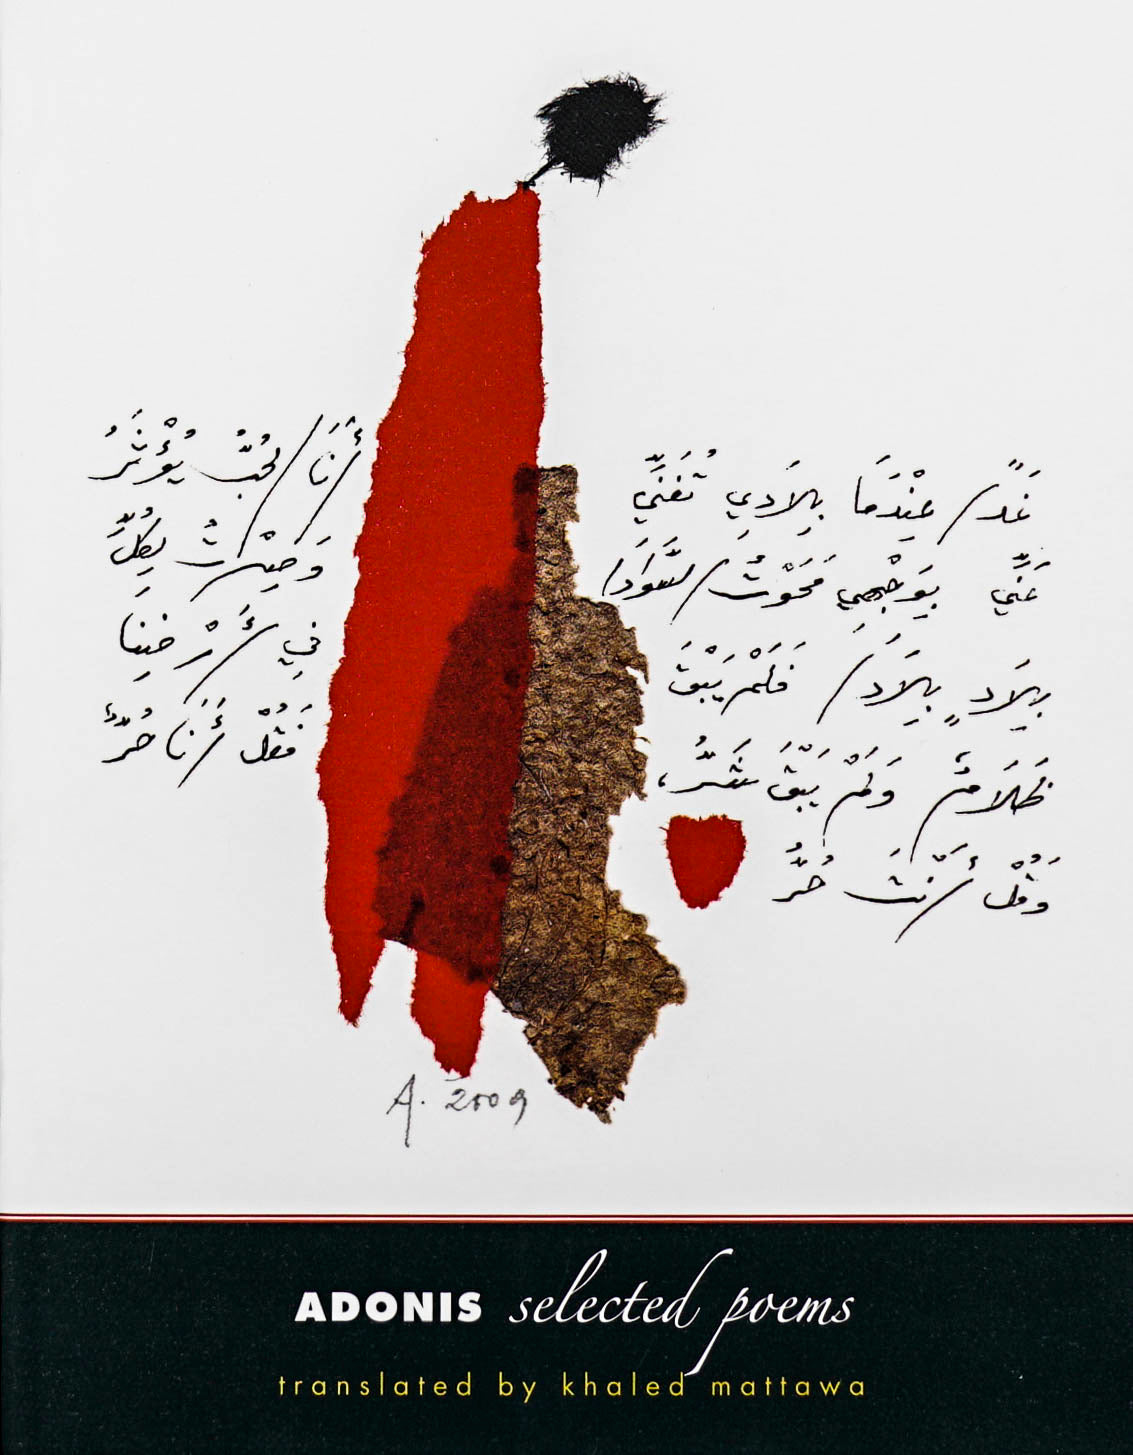 Adonis: Selected Poems Translated by Khaled Mattawa in white or yellow sans serif or script type with an expressive abstract composition in black red, similiar to ink blotting,and blue with what appears to be notes in Arabic over a white backdrop and black panel on the bottom of the book cover